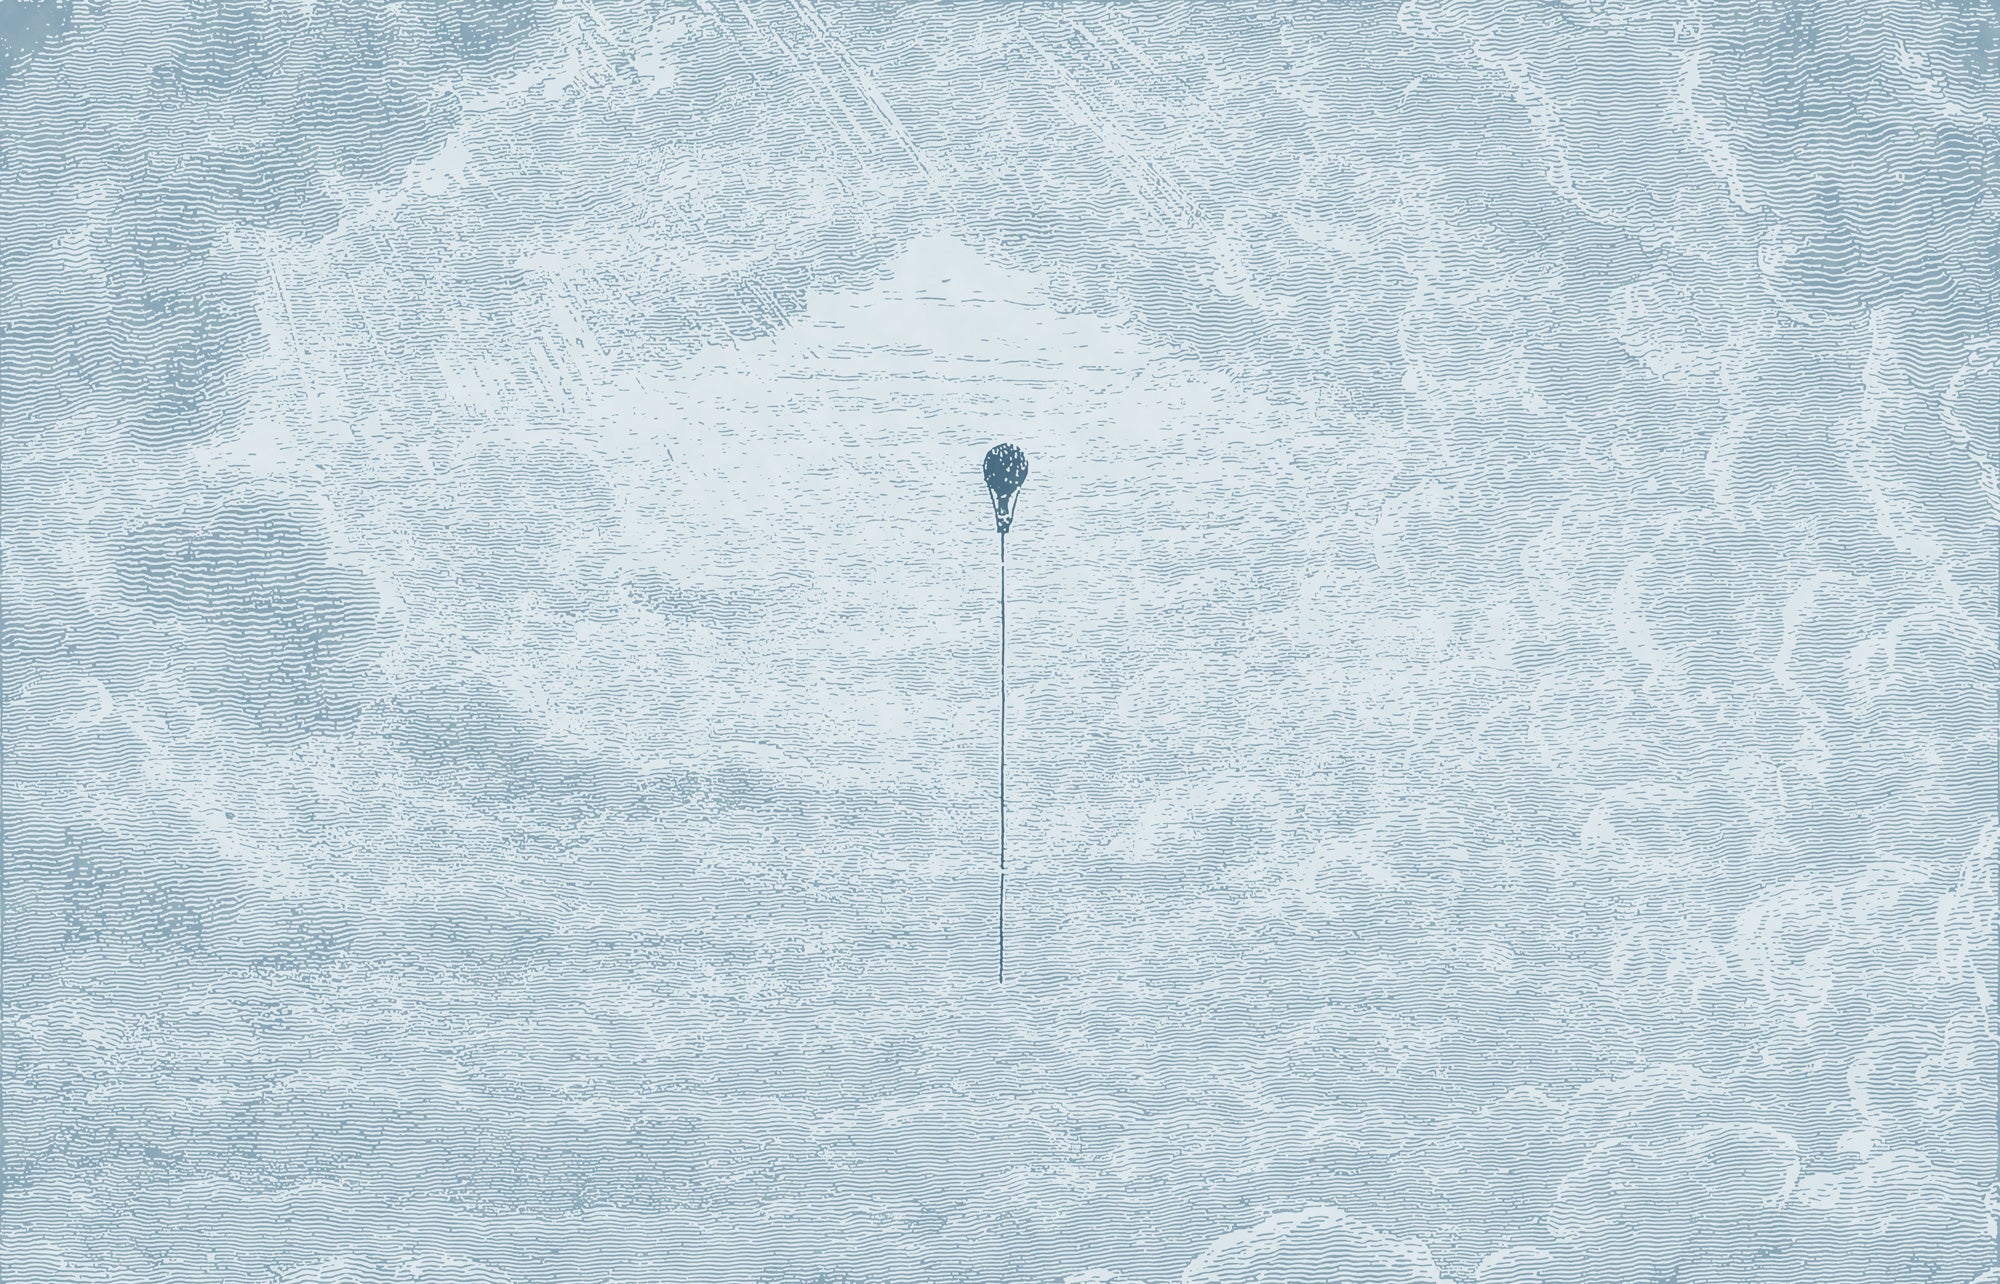 Theo Sky - Blue Etched Hot Air Balloon & Clouds Wallpaper Mural